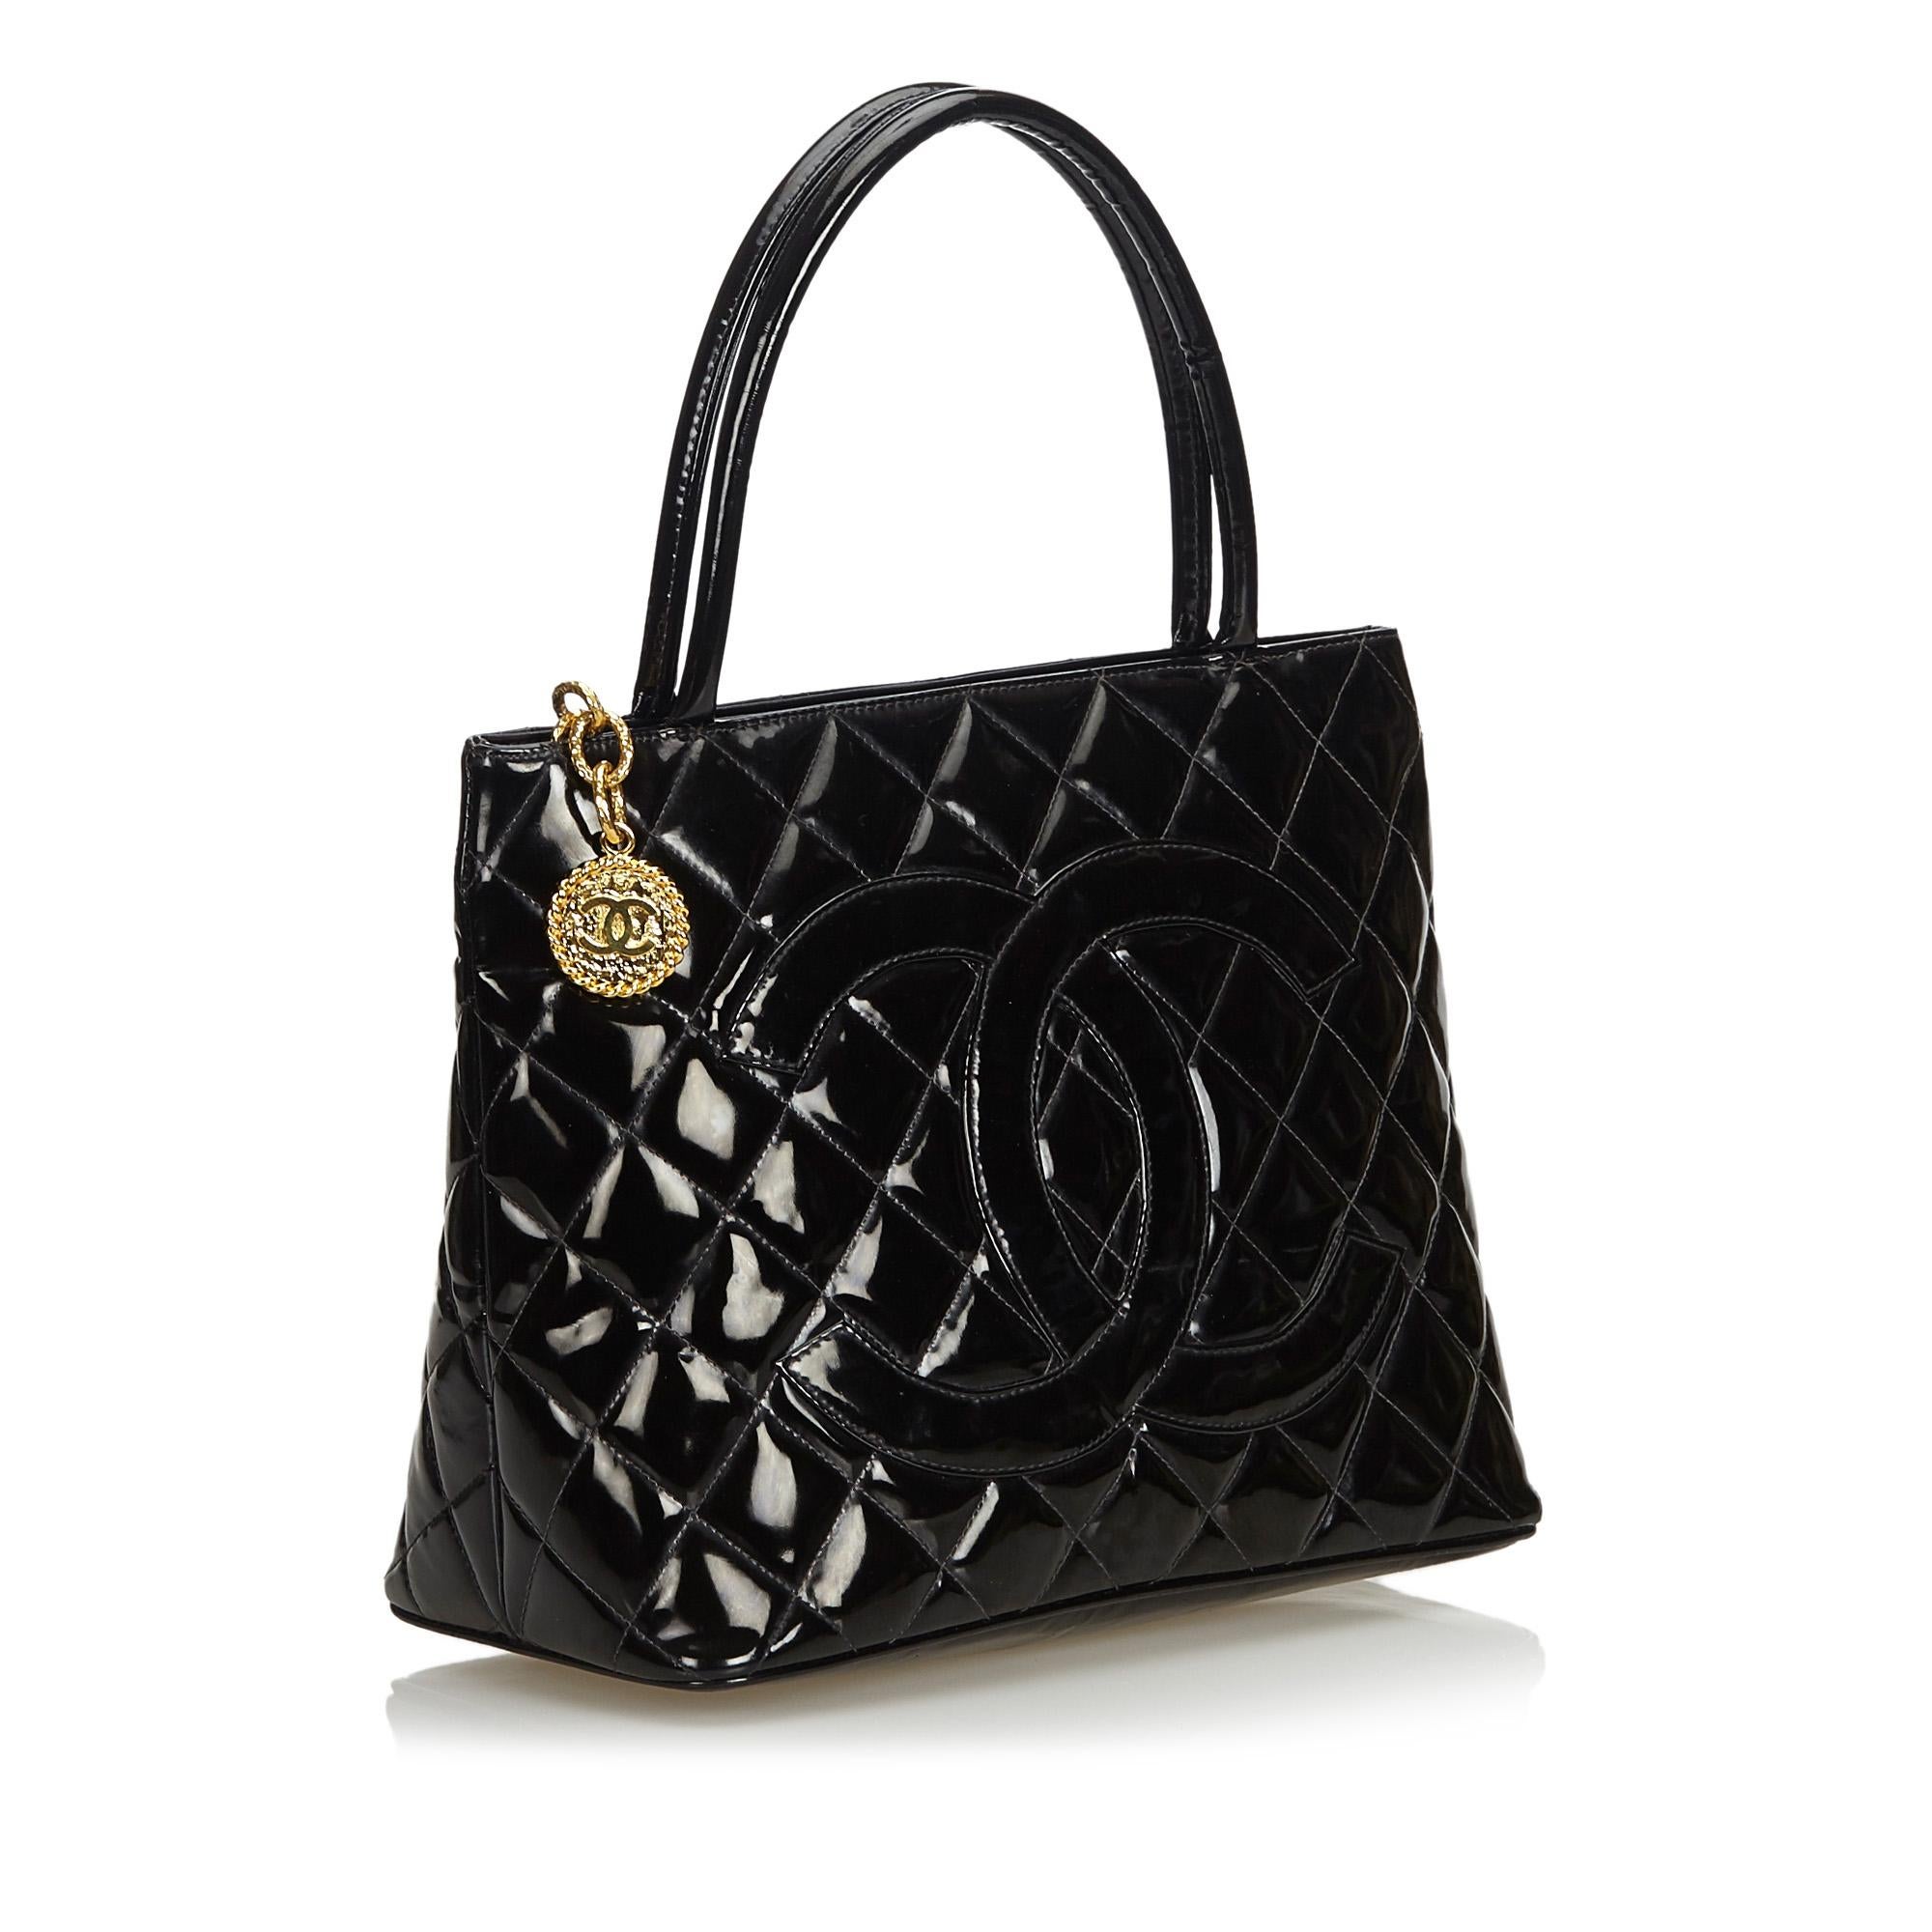 The Medallion tote features a quilted patent leather body, rolled leather handles, a top zip closure, exterior back slip pocket, and an interior zip pocket. It carries as B+ condition rating.

Inclusions: 
This item does not come with